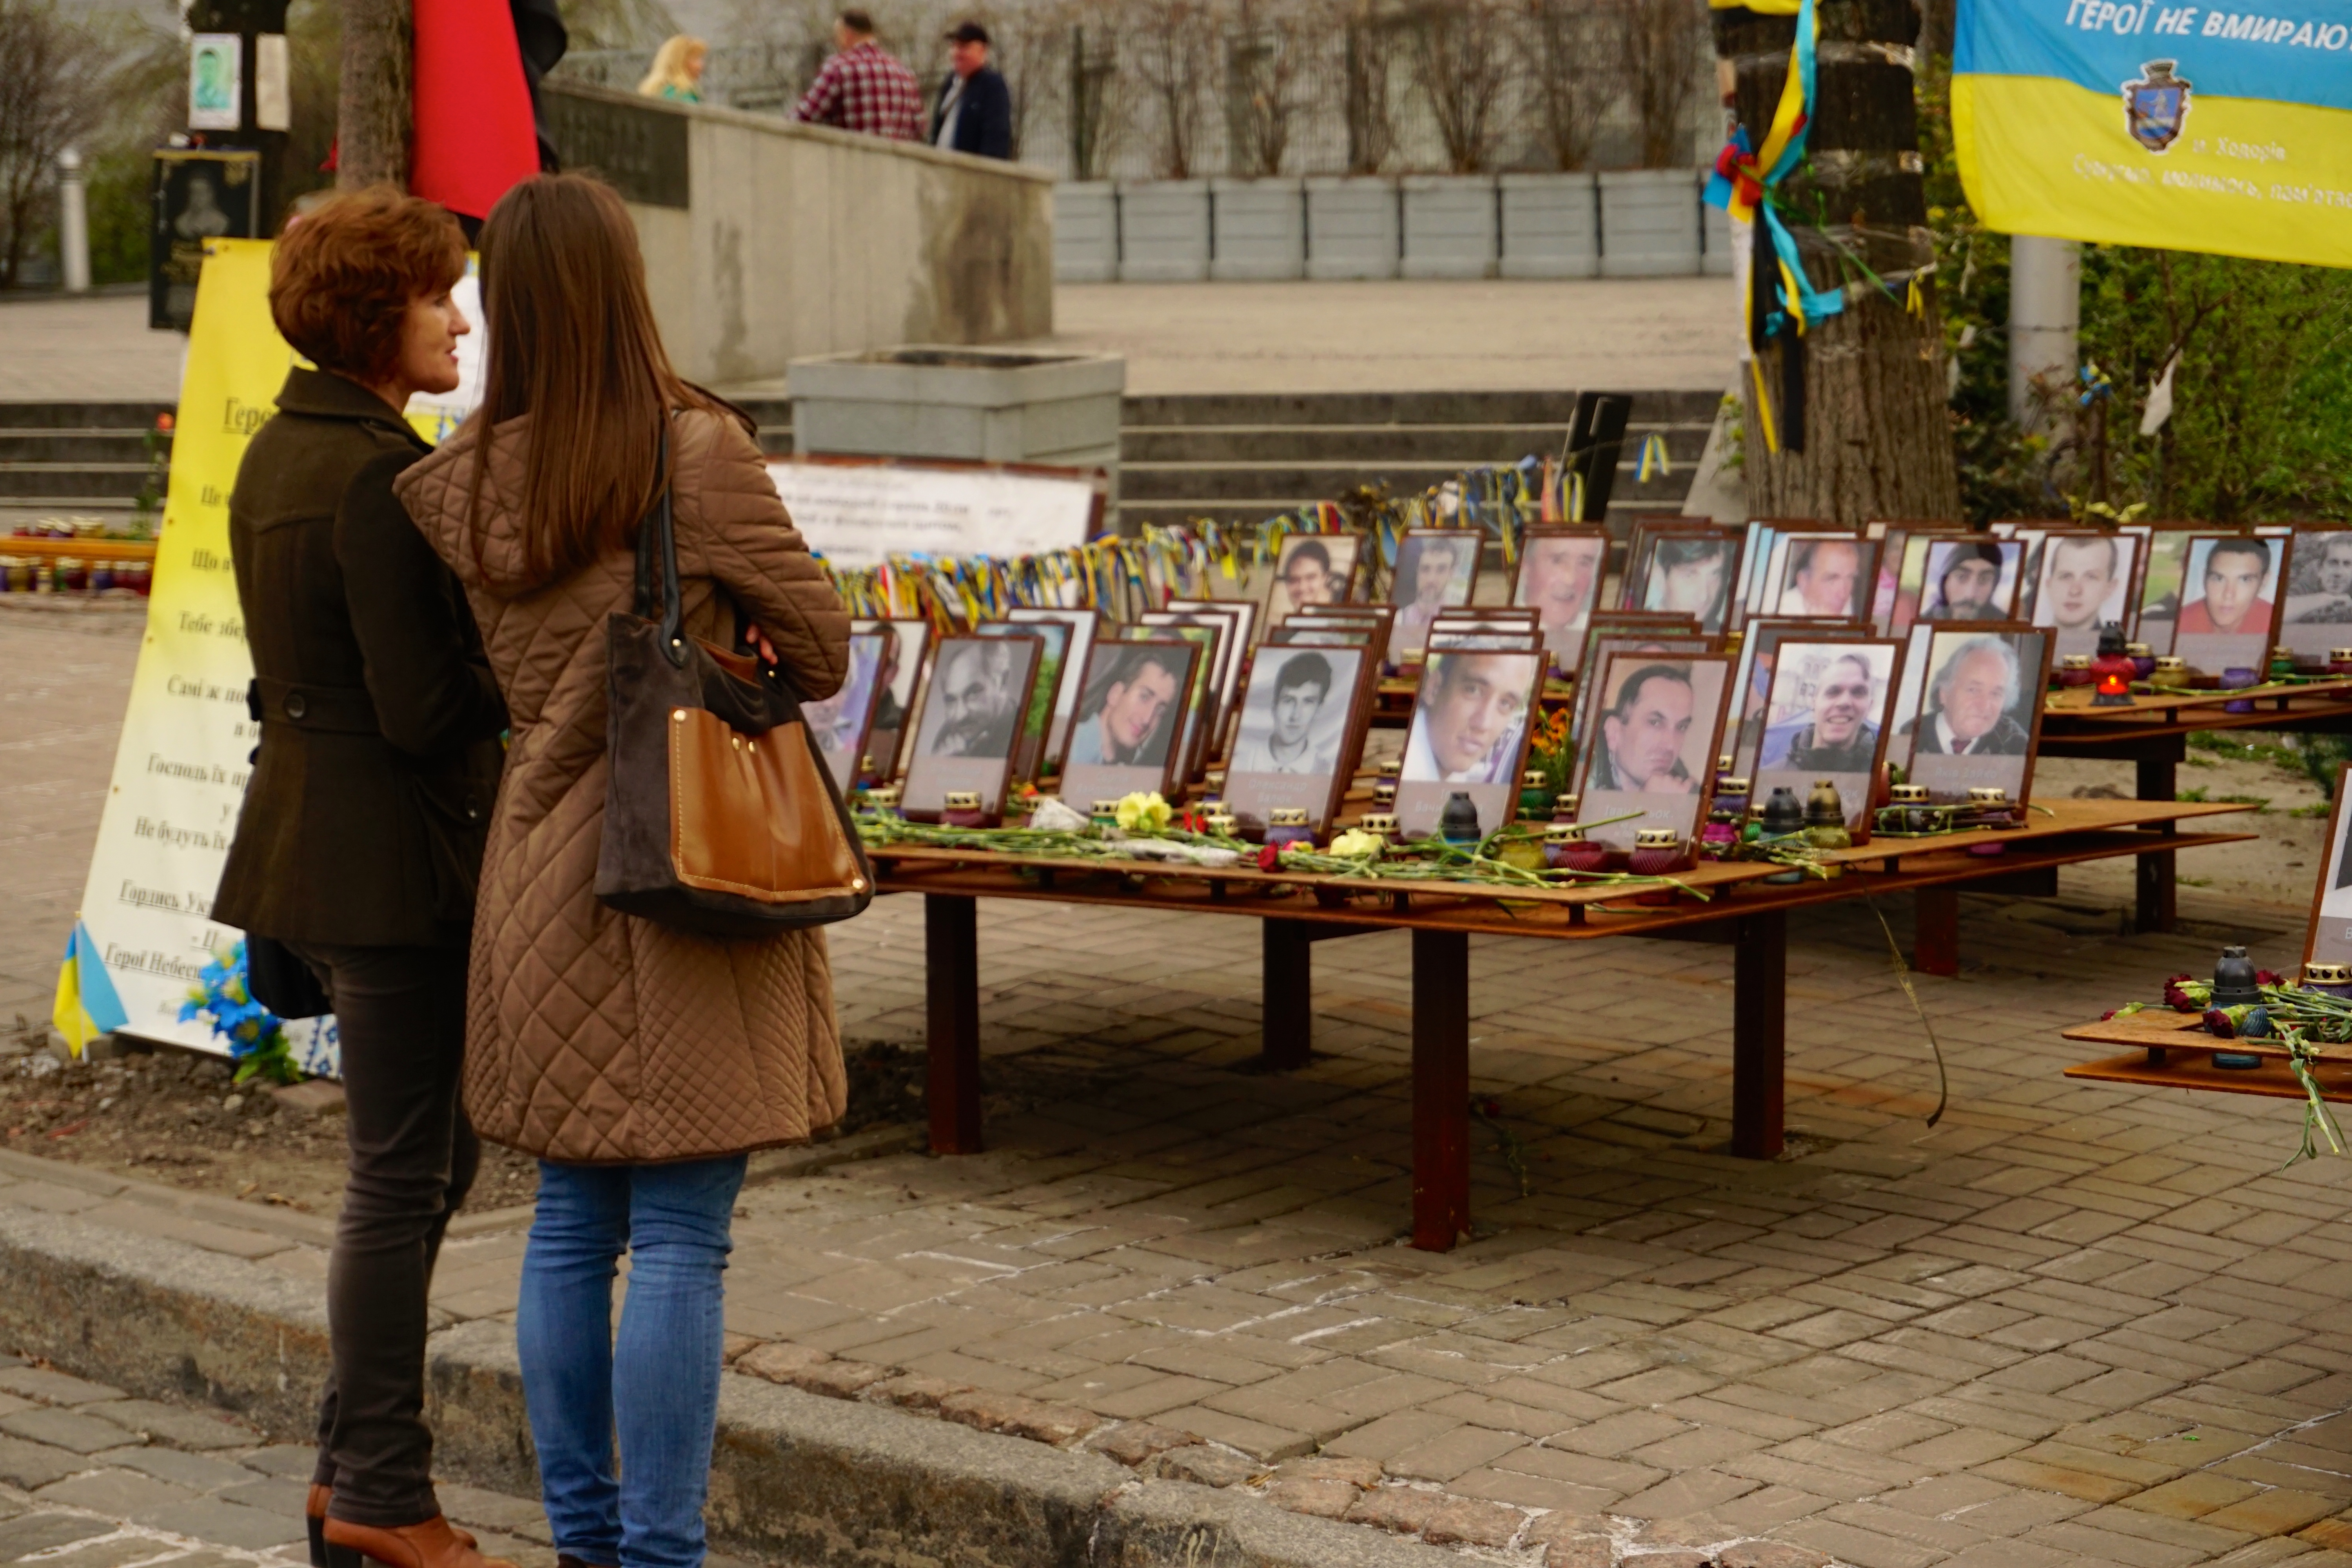 More than 100 protesters died during the February 2014 Ukrainian revolution. (Photos: Nolan Peterson/The Daily Signal)